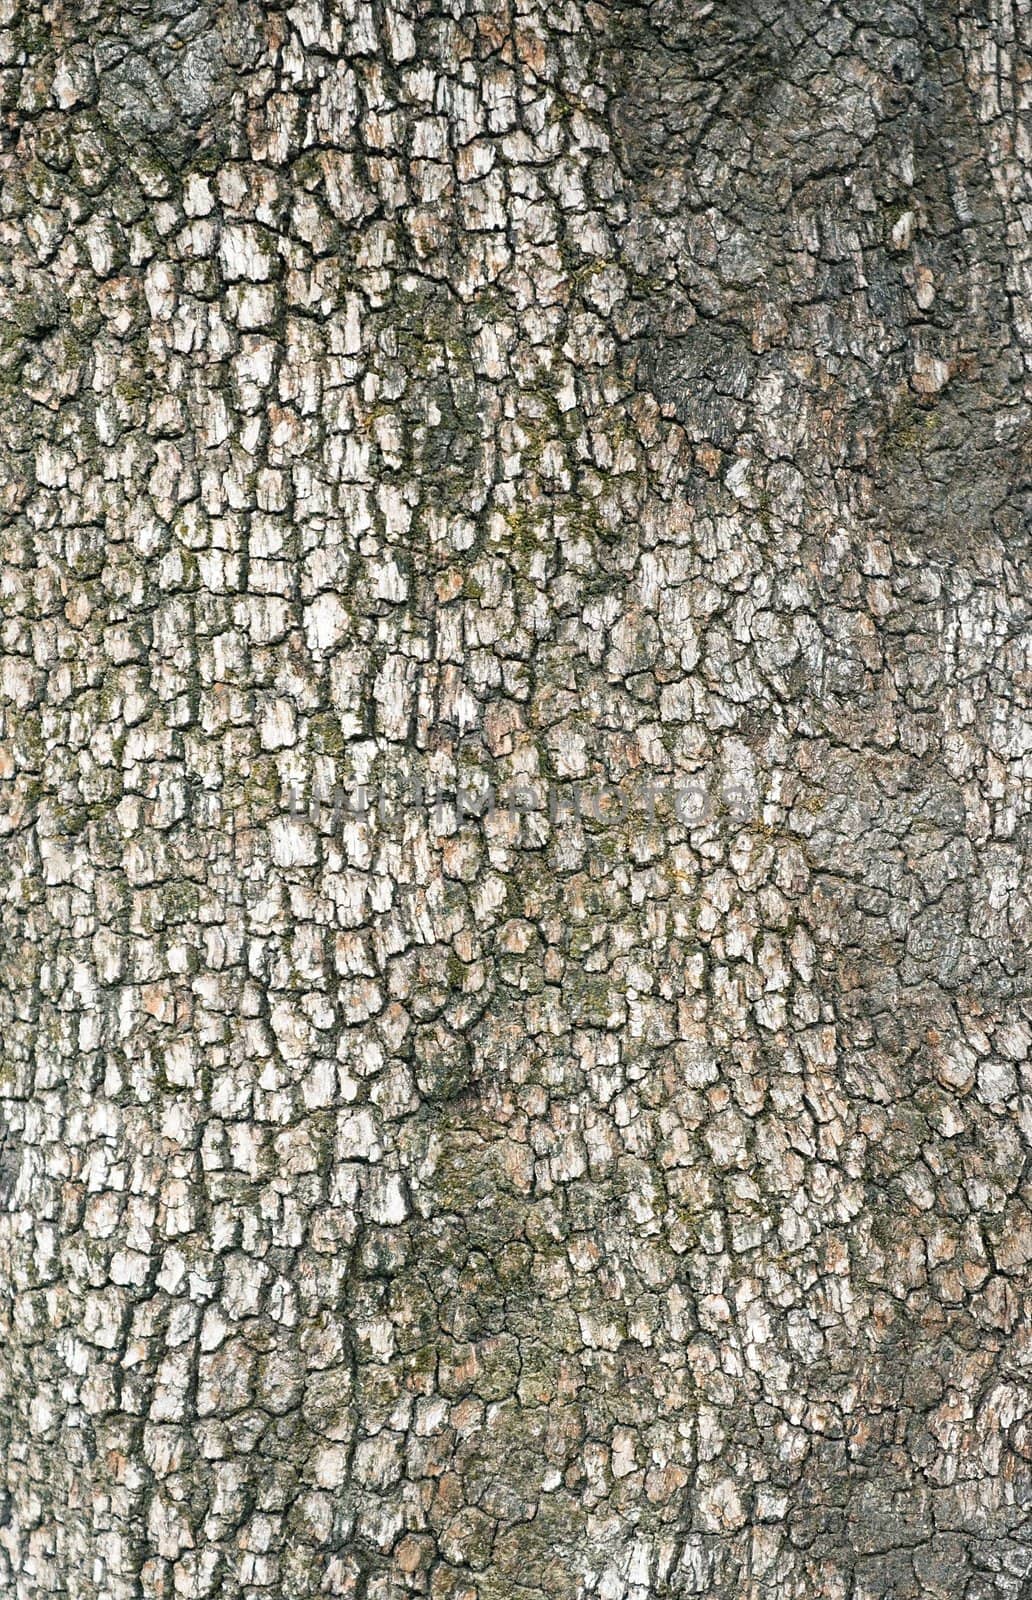 Texture of the bark of an old tree in the park